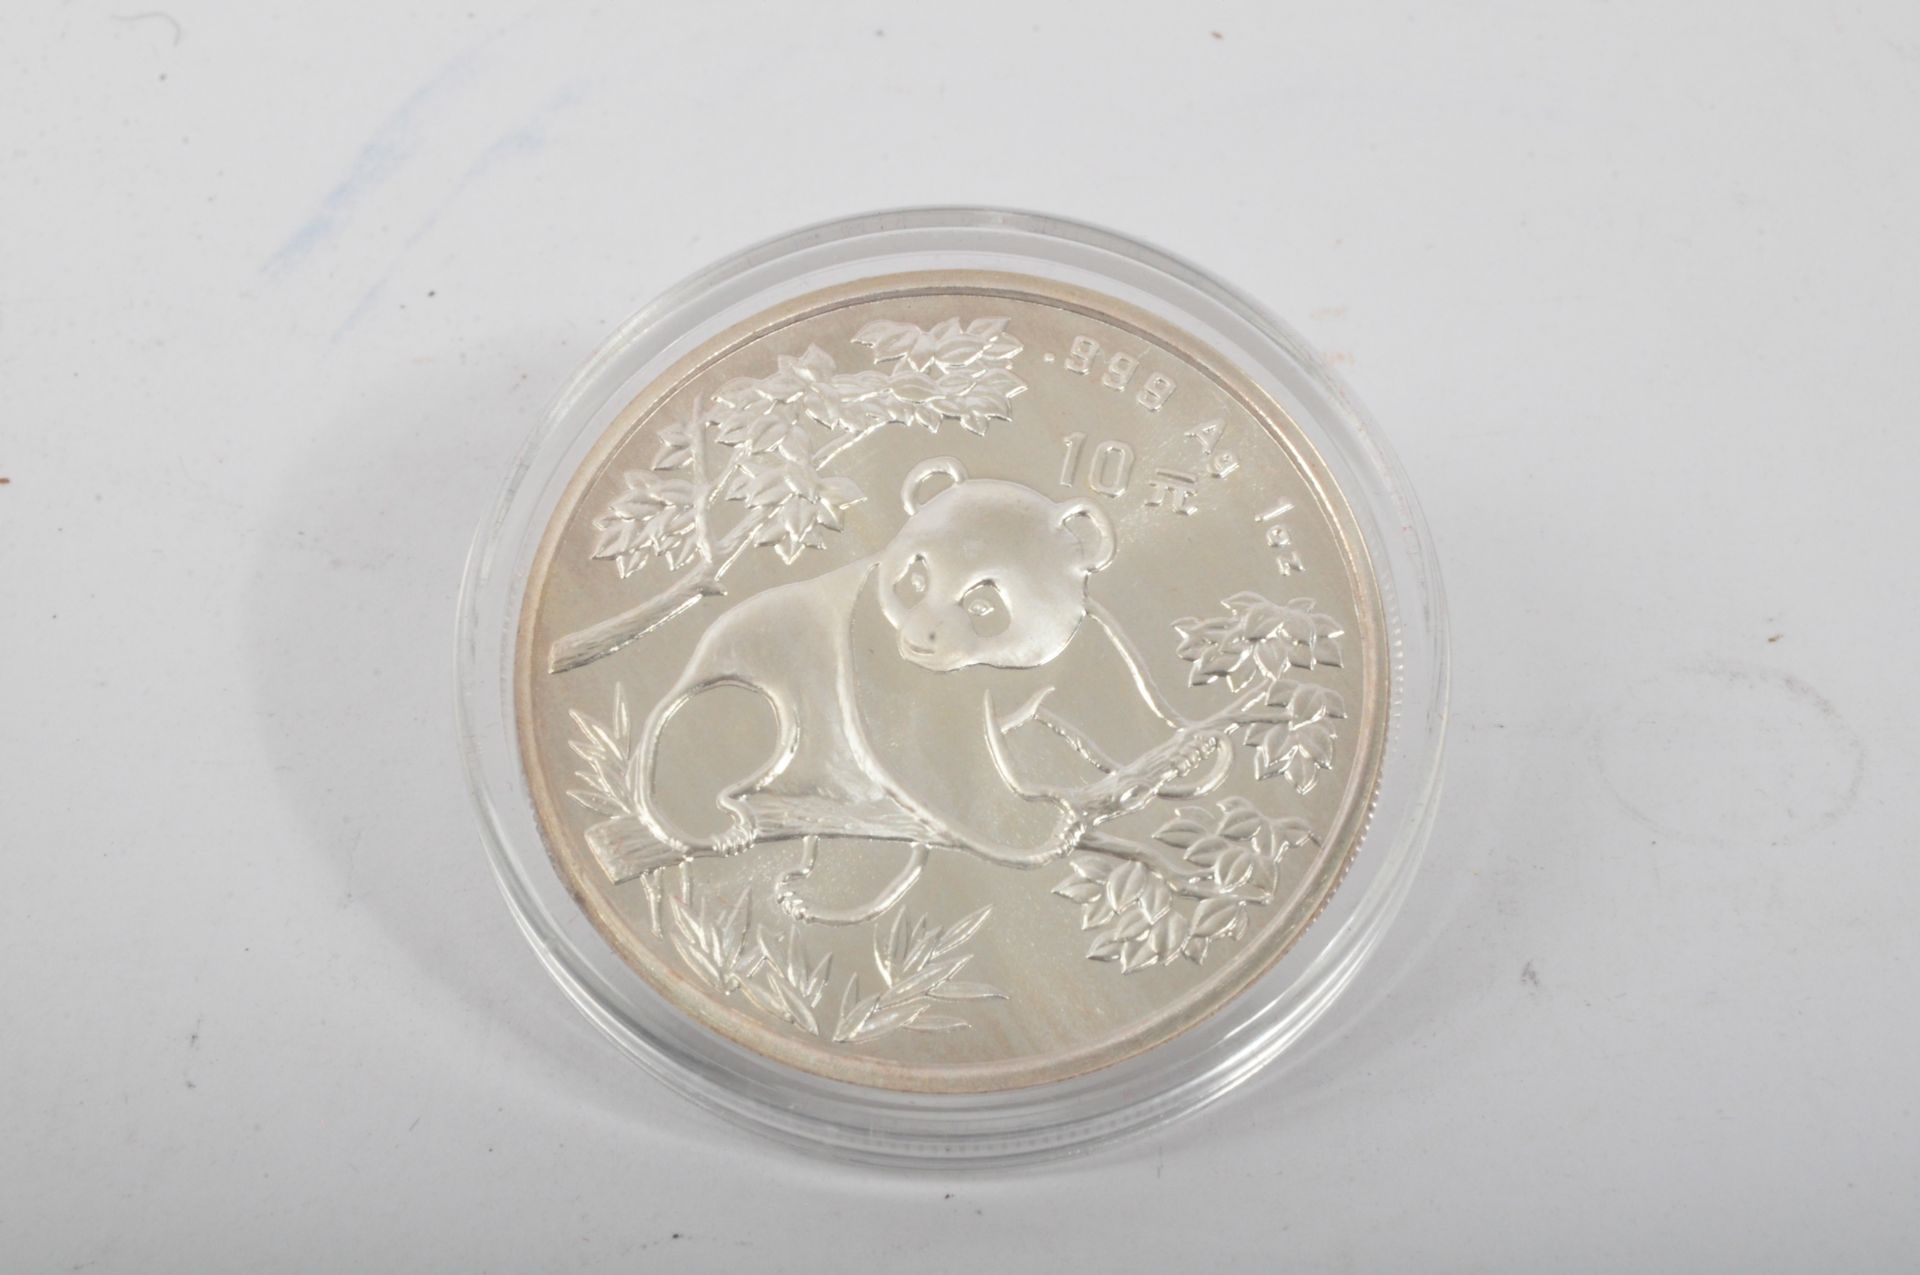 WESTMINSTER COLLECTION - PANDA CHINA SILVER COIN COLLECTION - Bild 9 aus 41